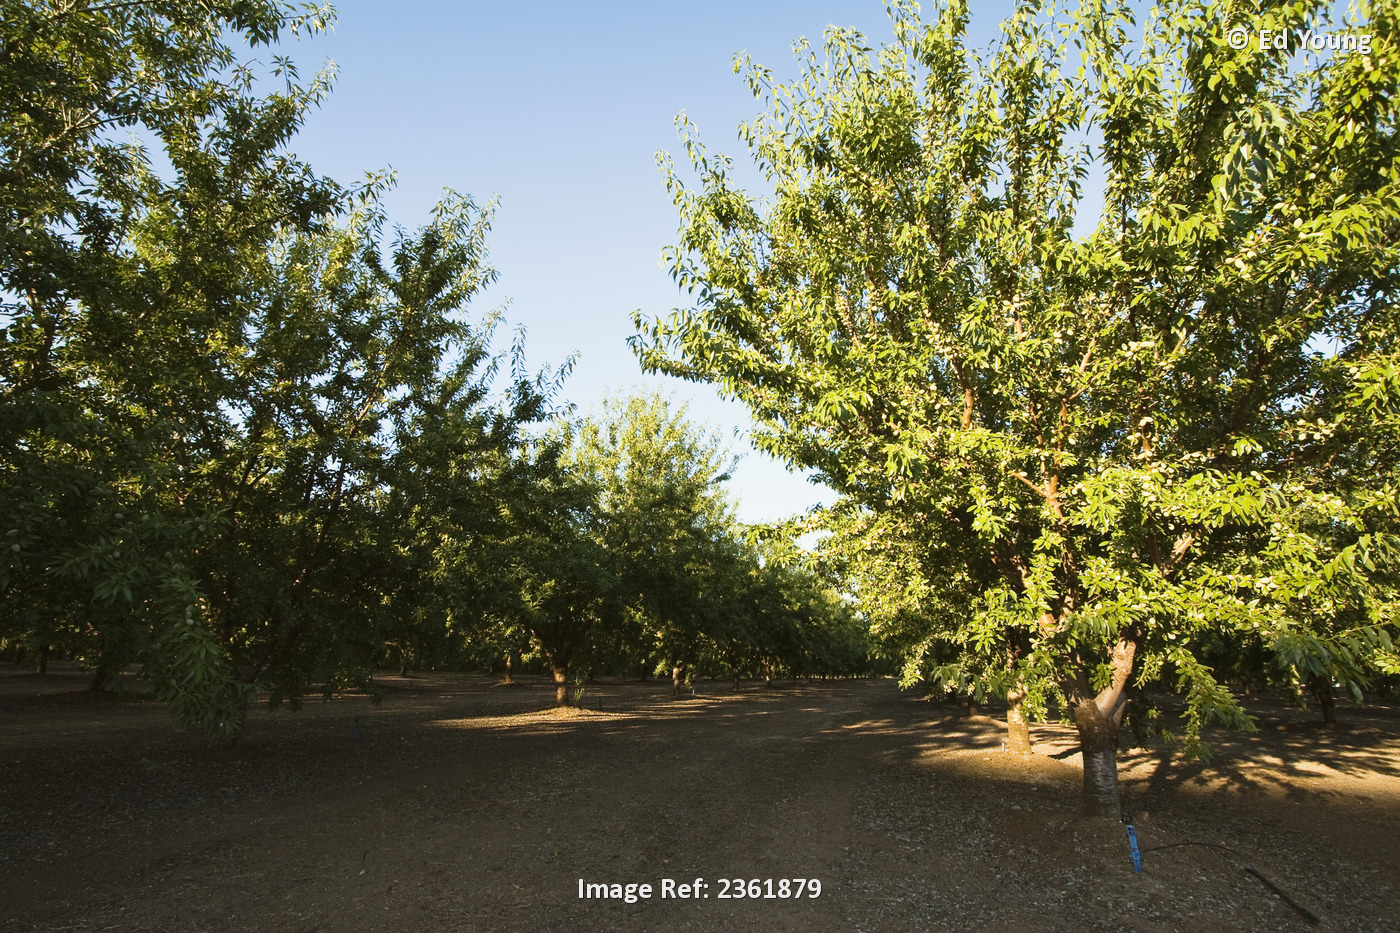 Agriculture - Mature well maintained almond orchard in mid season late ...